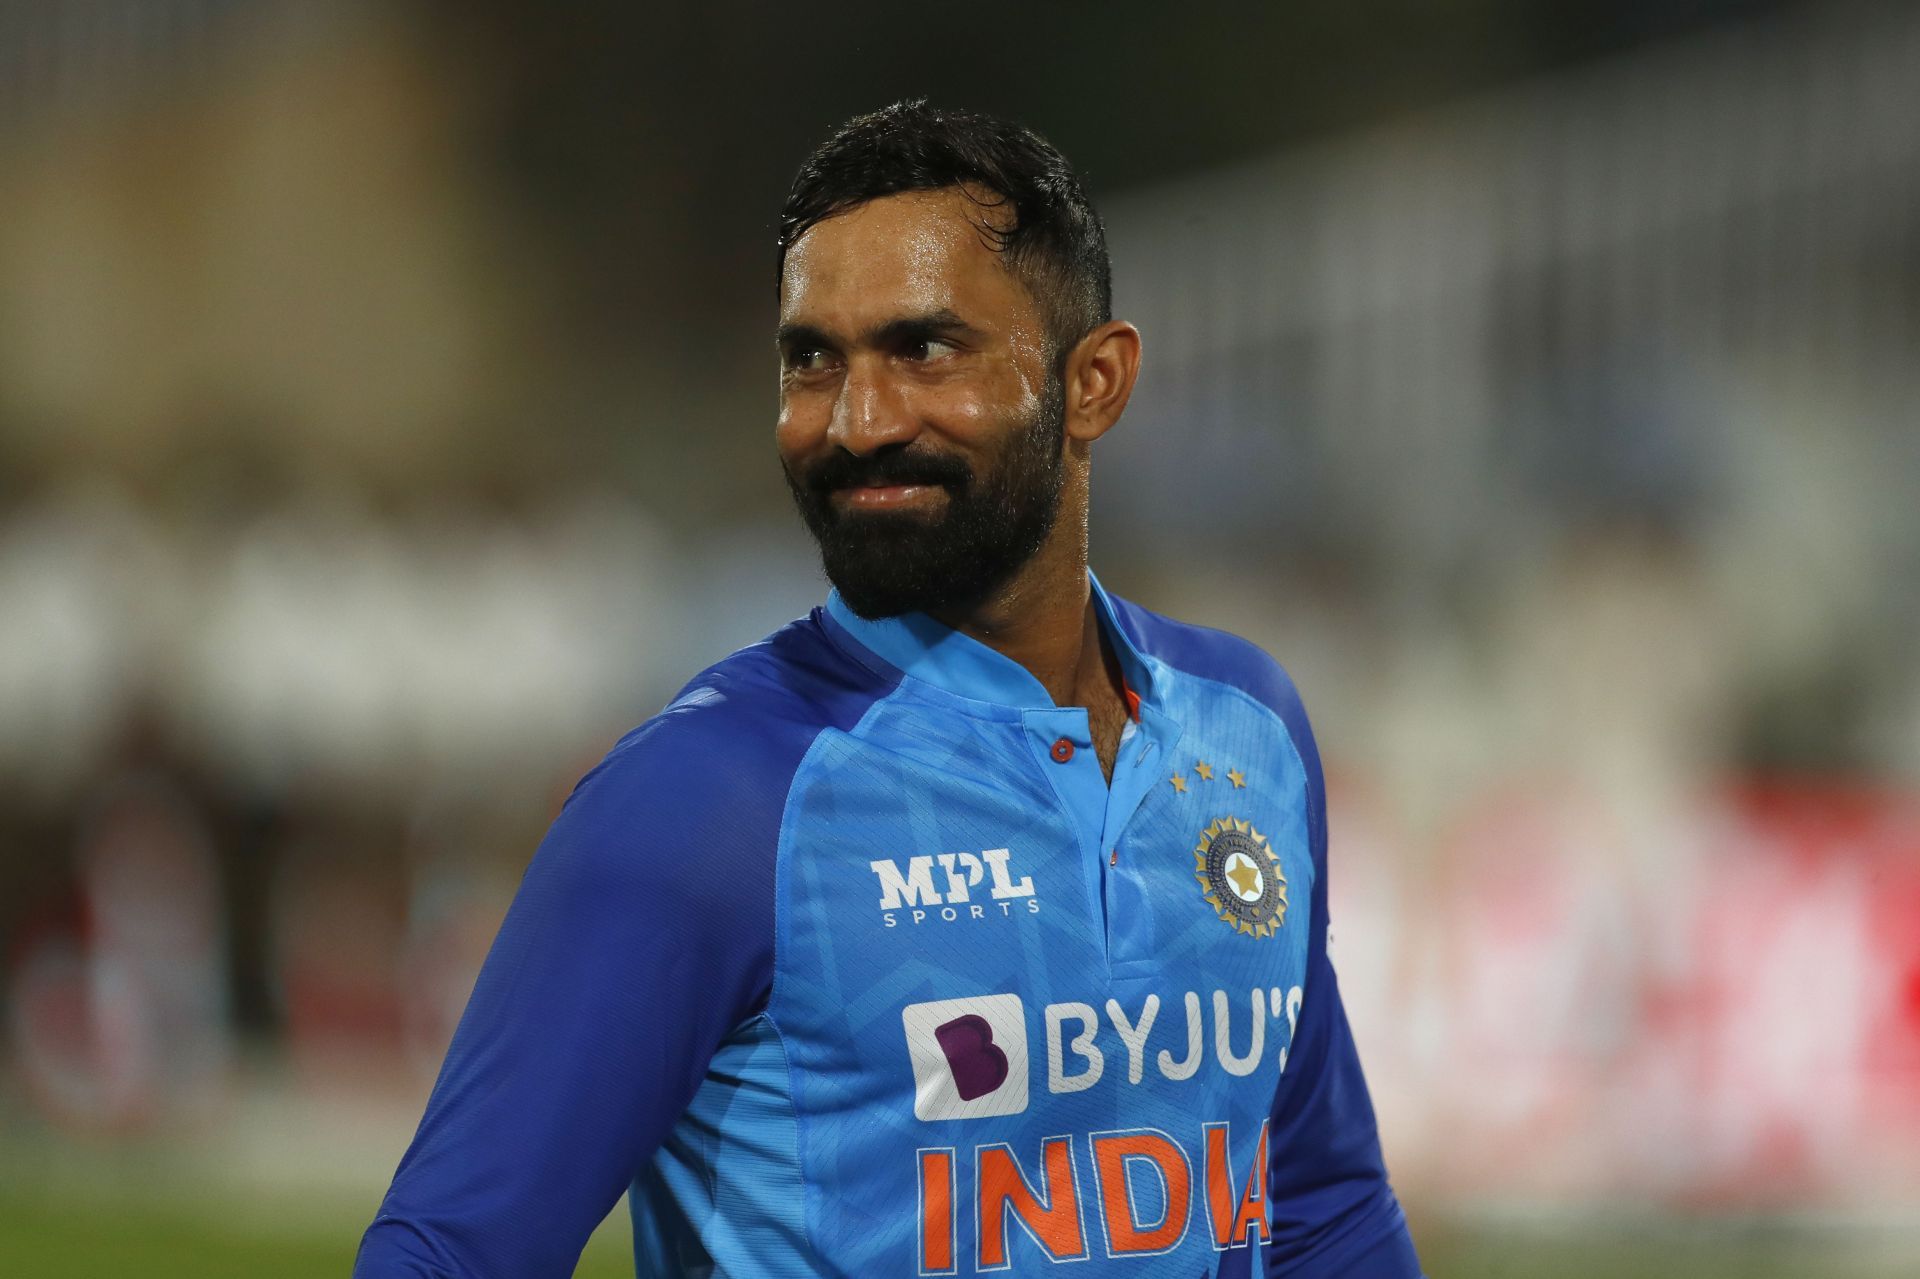 Dinesh Karthik will play the role of a finisher in the T20 World Cup 2022